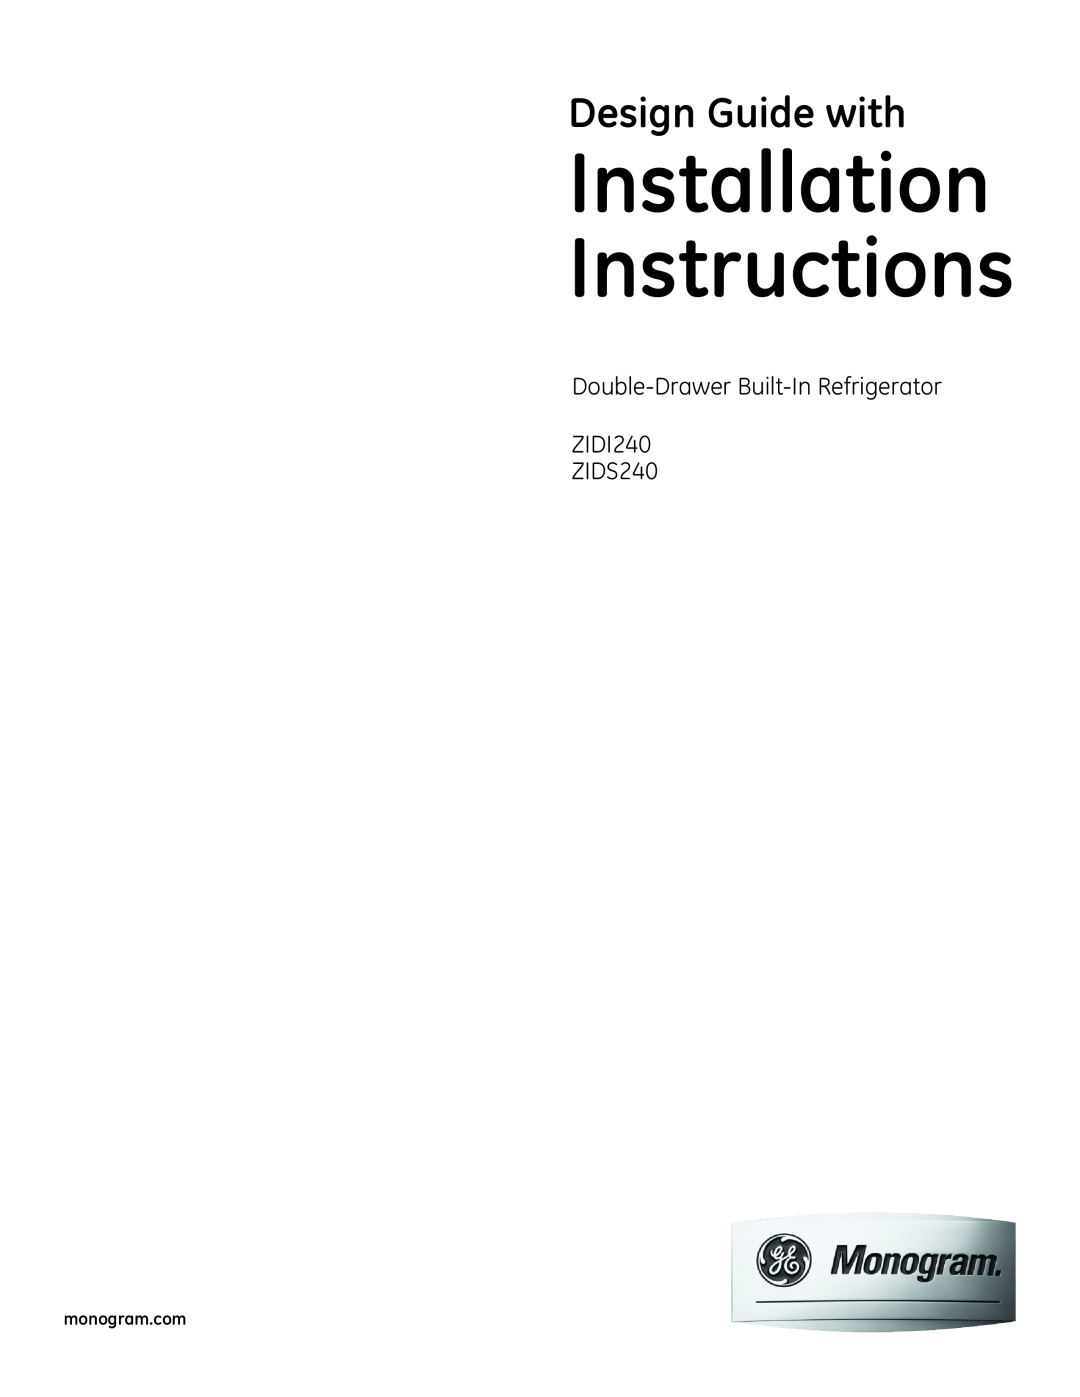 GE ZIDS240, ZIDI240 installation instructions Installation Instructions, Design Guide with 